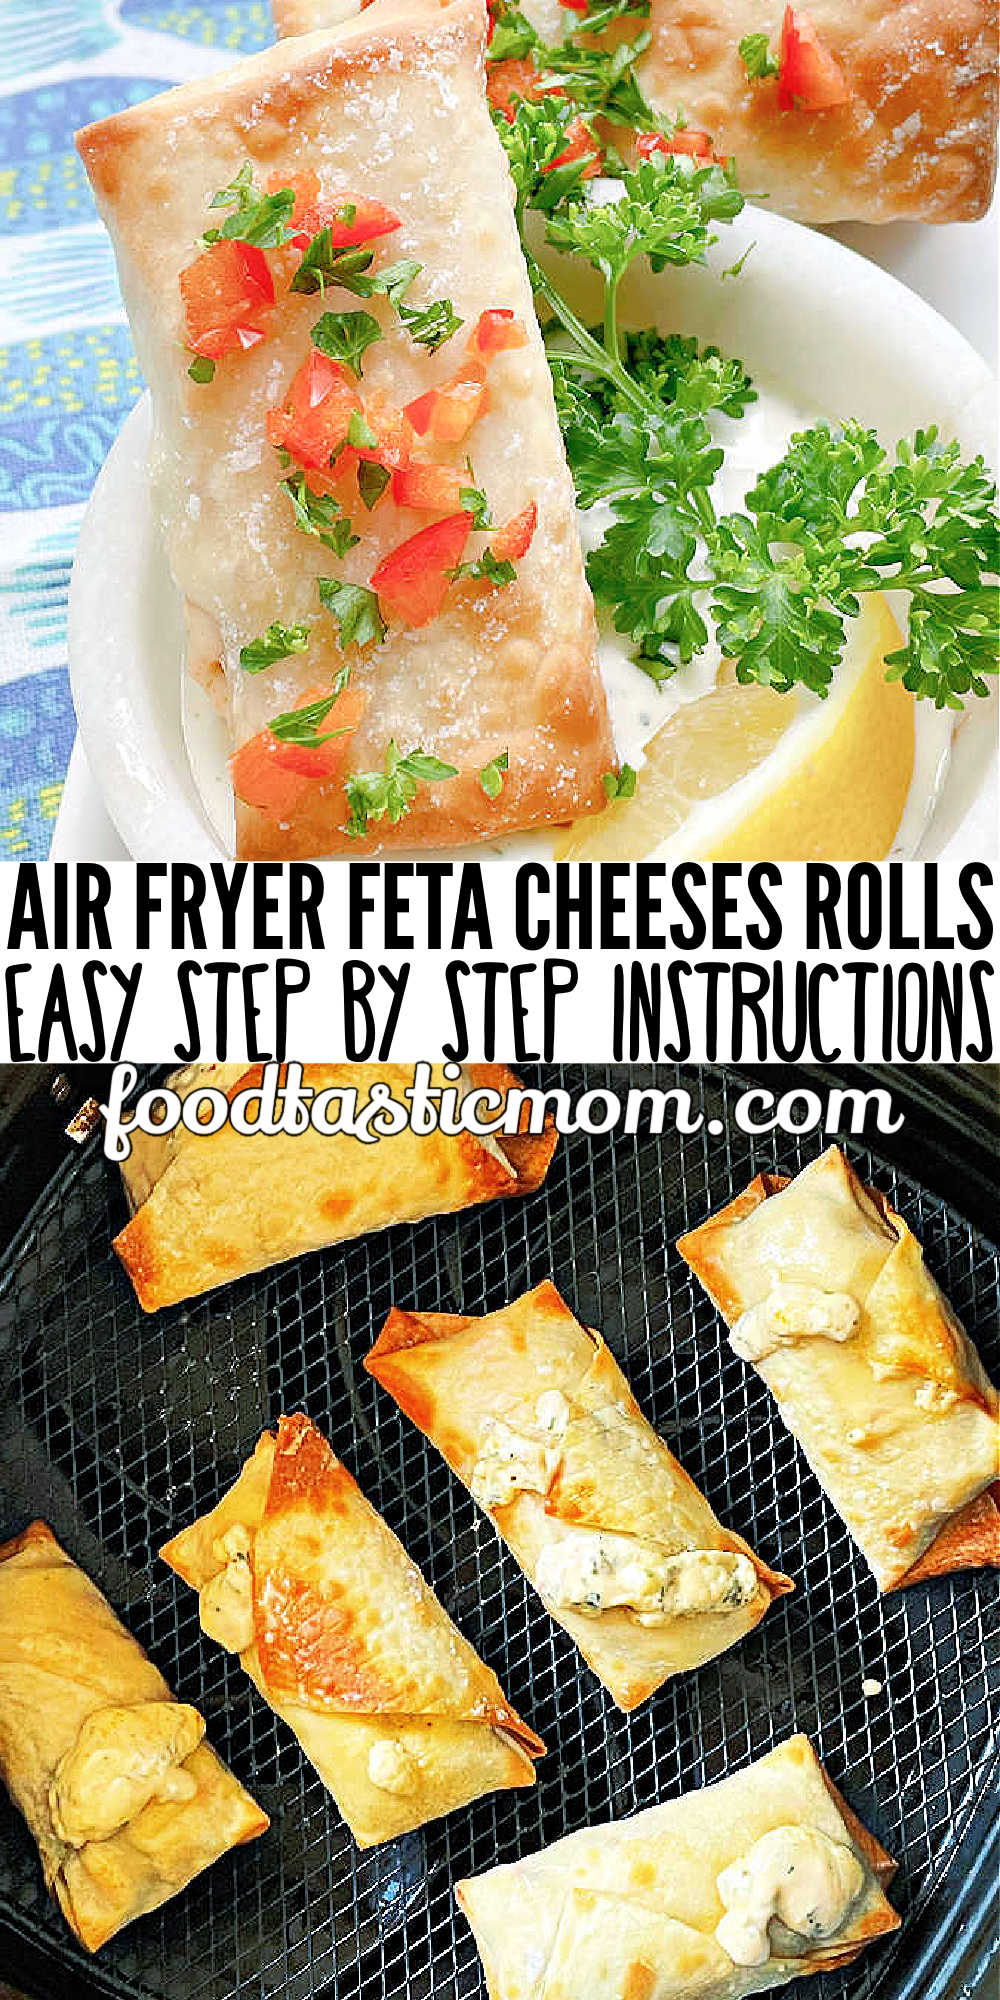 Air Fryer Feta Cheese Rolls are delightfully crispy egg rolls wrappers with red pepper, feta cheese, herbs and spices. Simply delicious. via @foodtasticmom